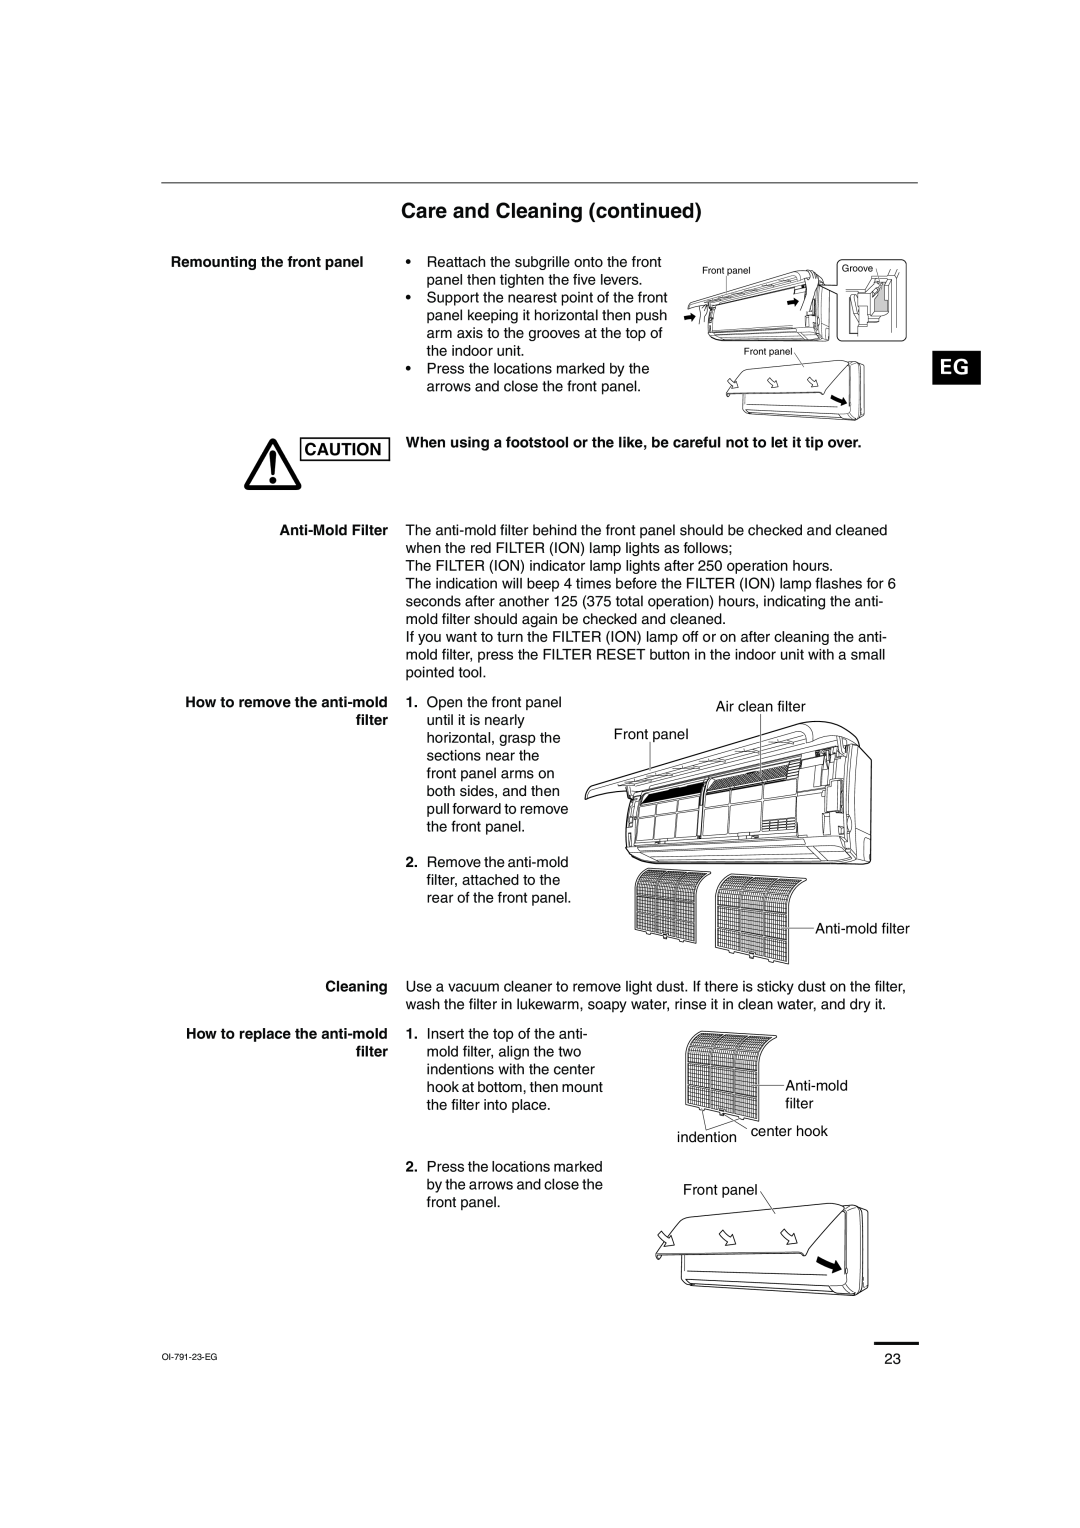 Sanyo SAP-KRV94EHDX service manual Care and Cleaning continued, Remounting the front panel, Anti-MoldFilter, filter 